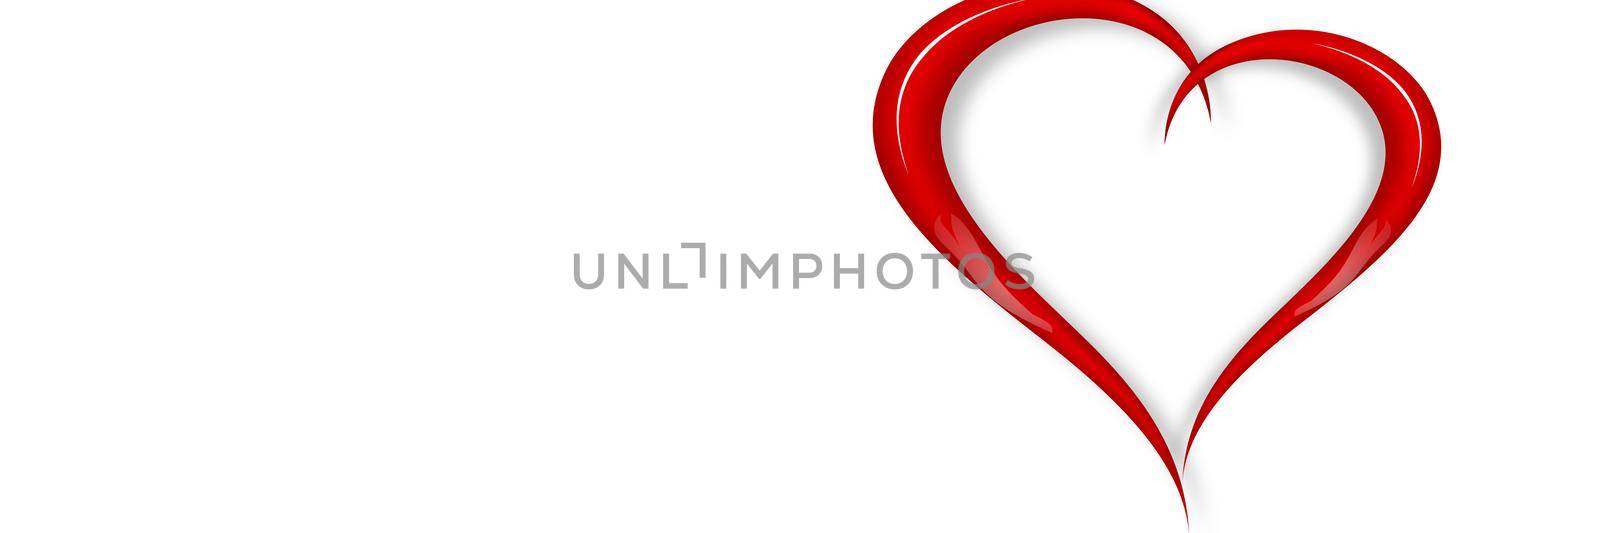 Happy valentine. Heart shaped symbol of love. 3d illustration by Taut